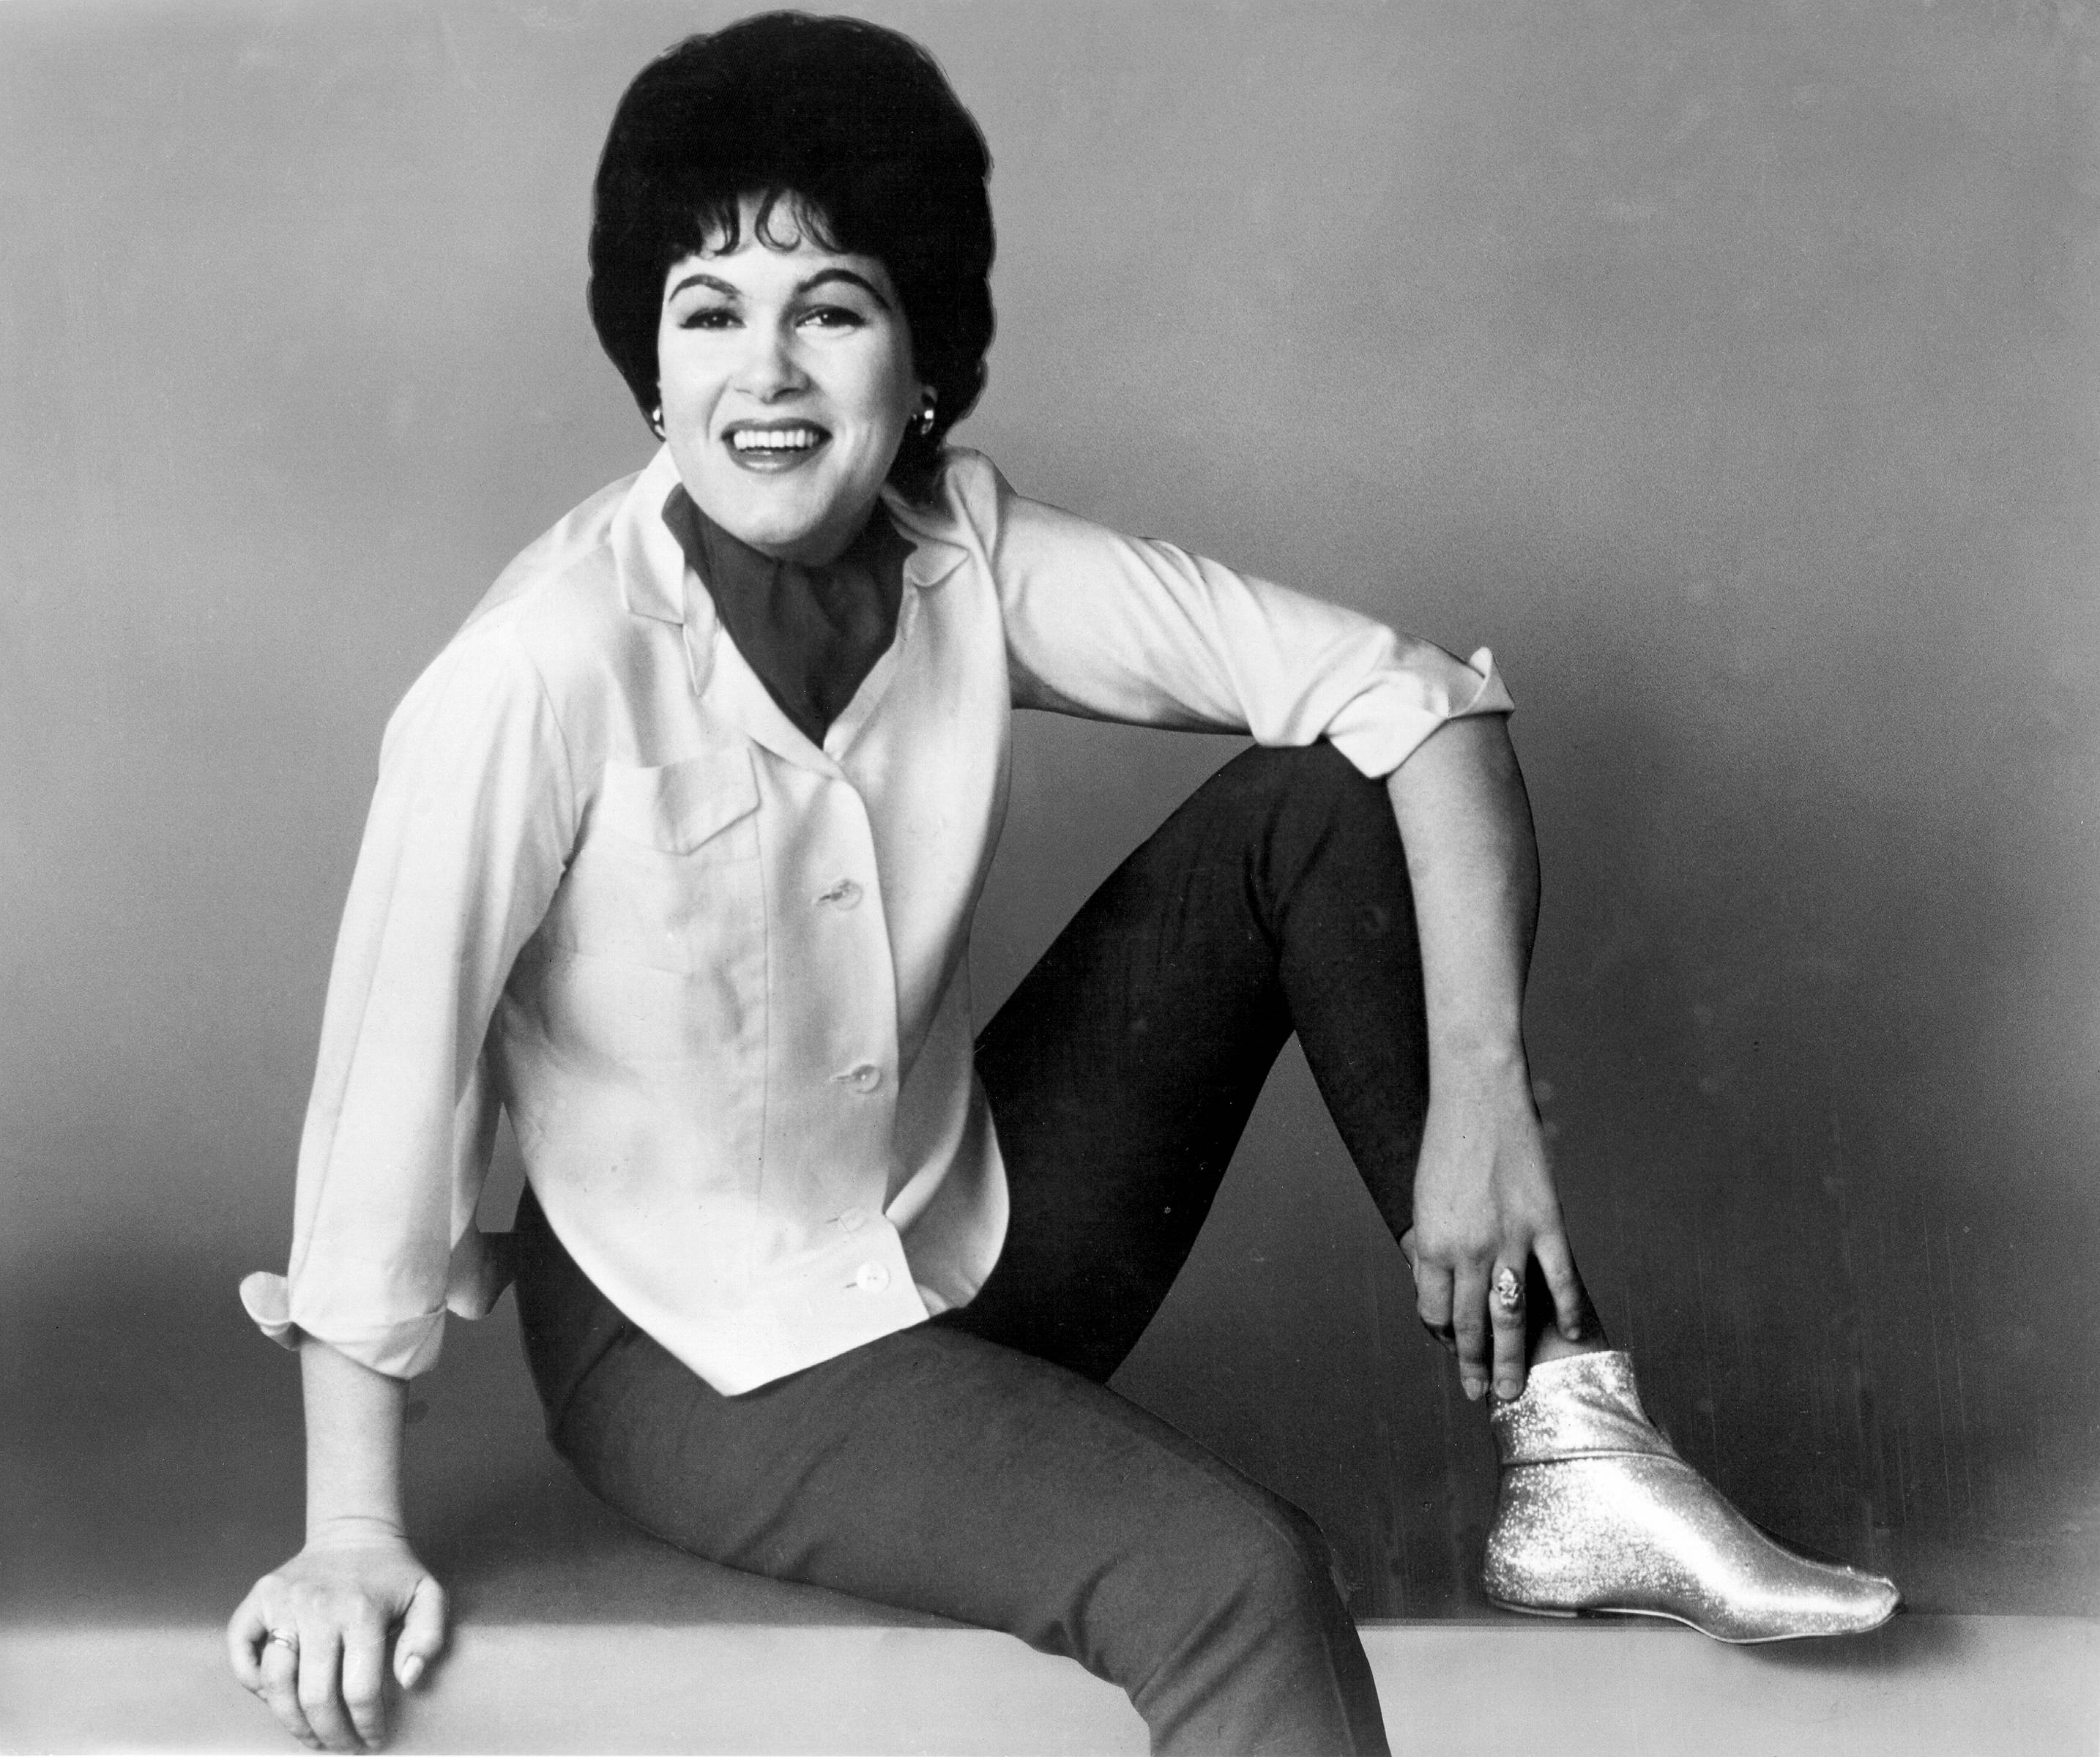 UNSPECIFIED - CIRCA 1970: Photo of Patsy Cline Photo by Michael Ochs Archives/Getty Images